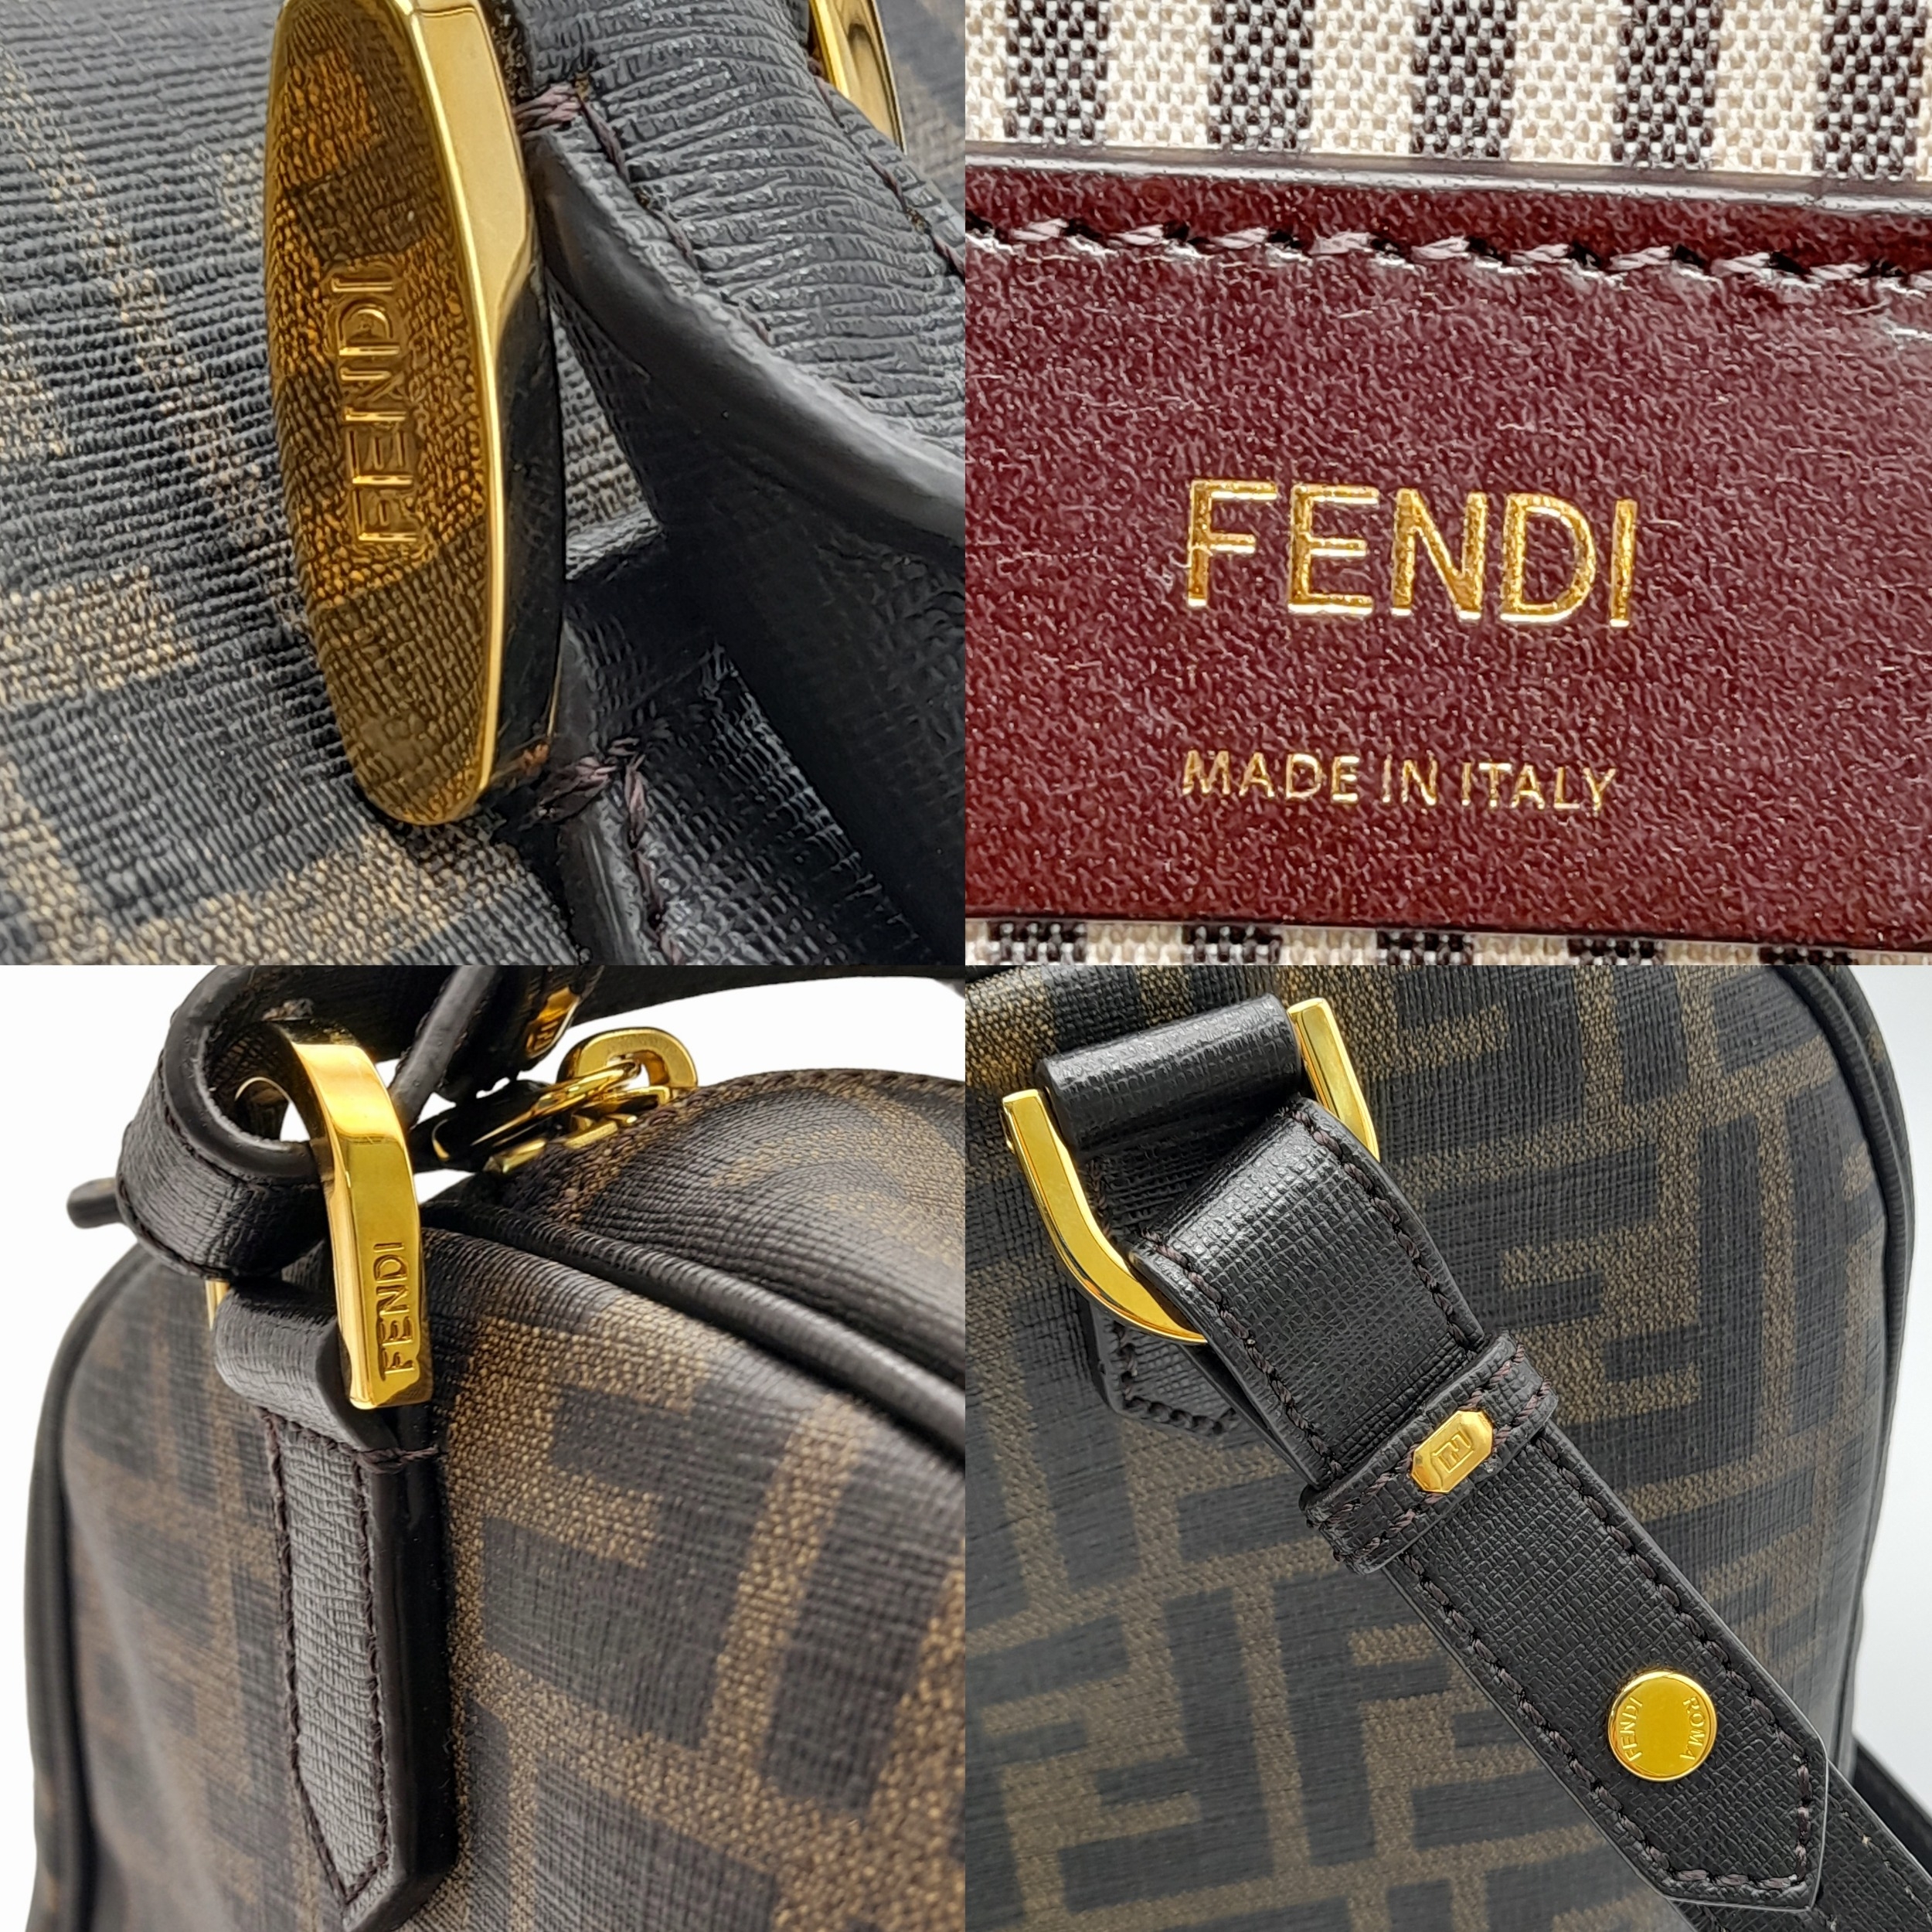 A Fendi Zucca Canvas Boston Bag. Canvas exterior, gold-tone hardware, adjustable strap, zipped top - Image 8 of 9